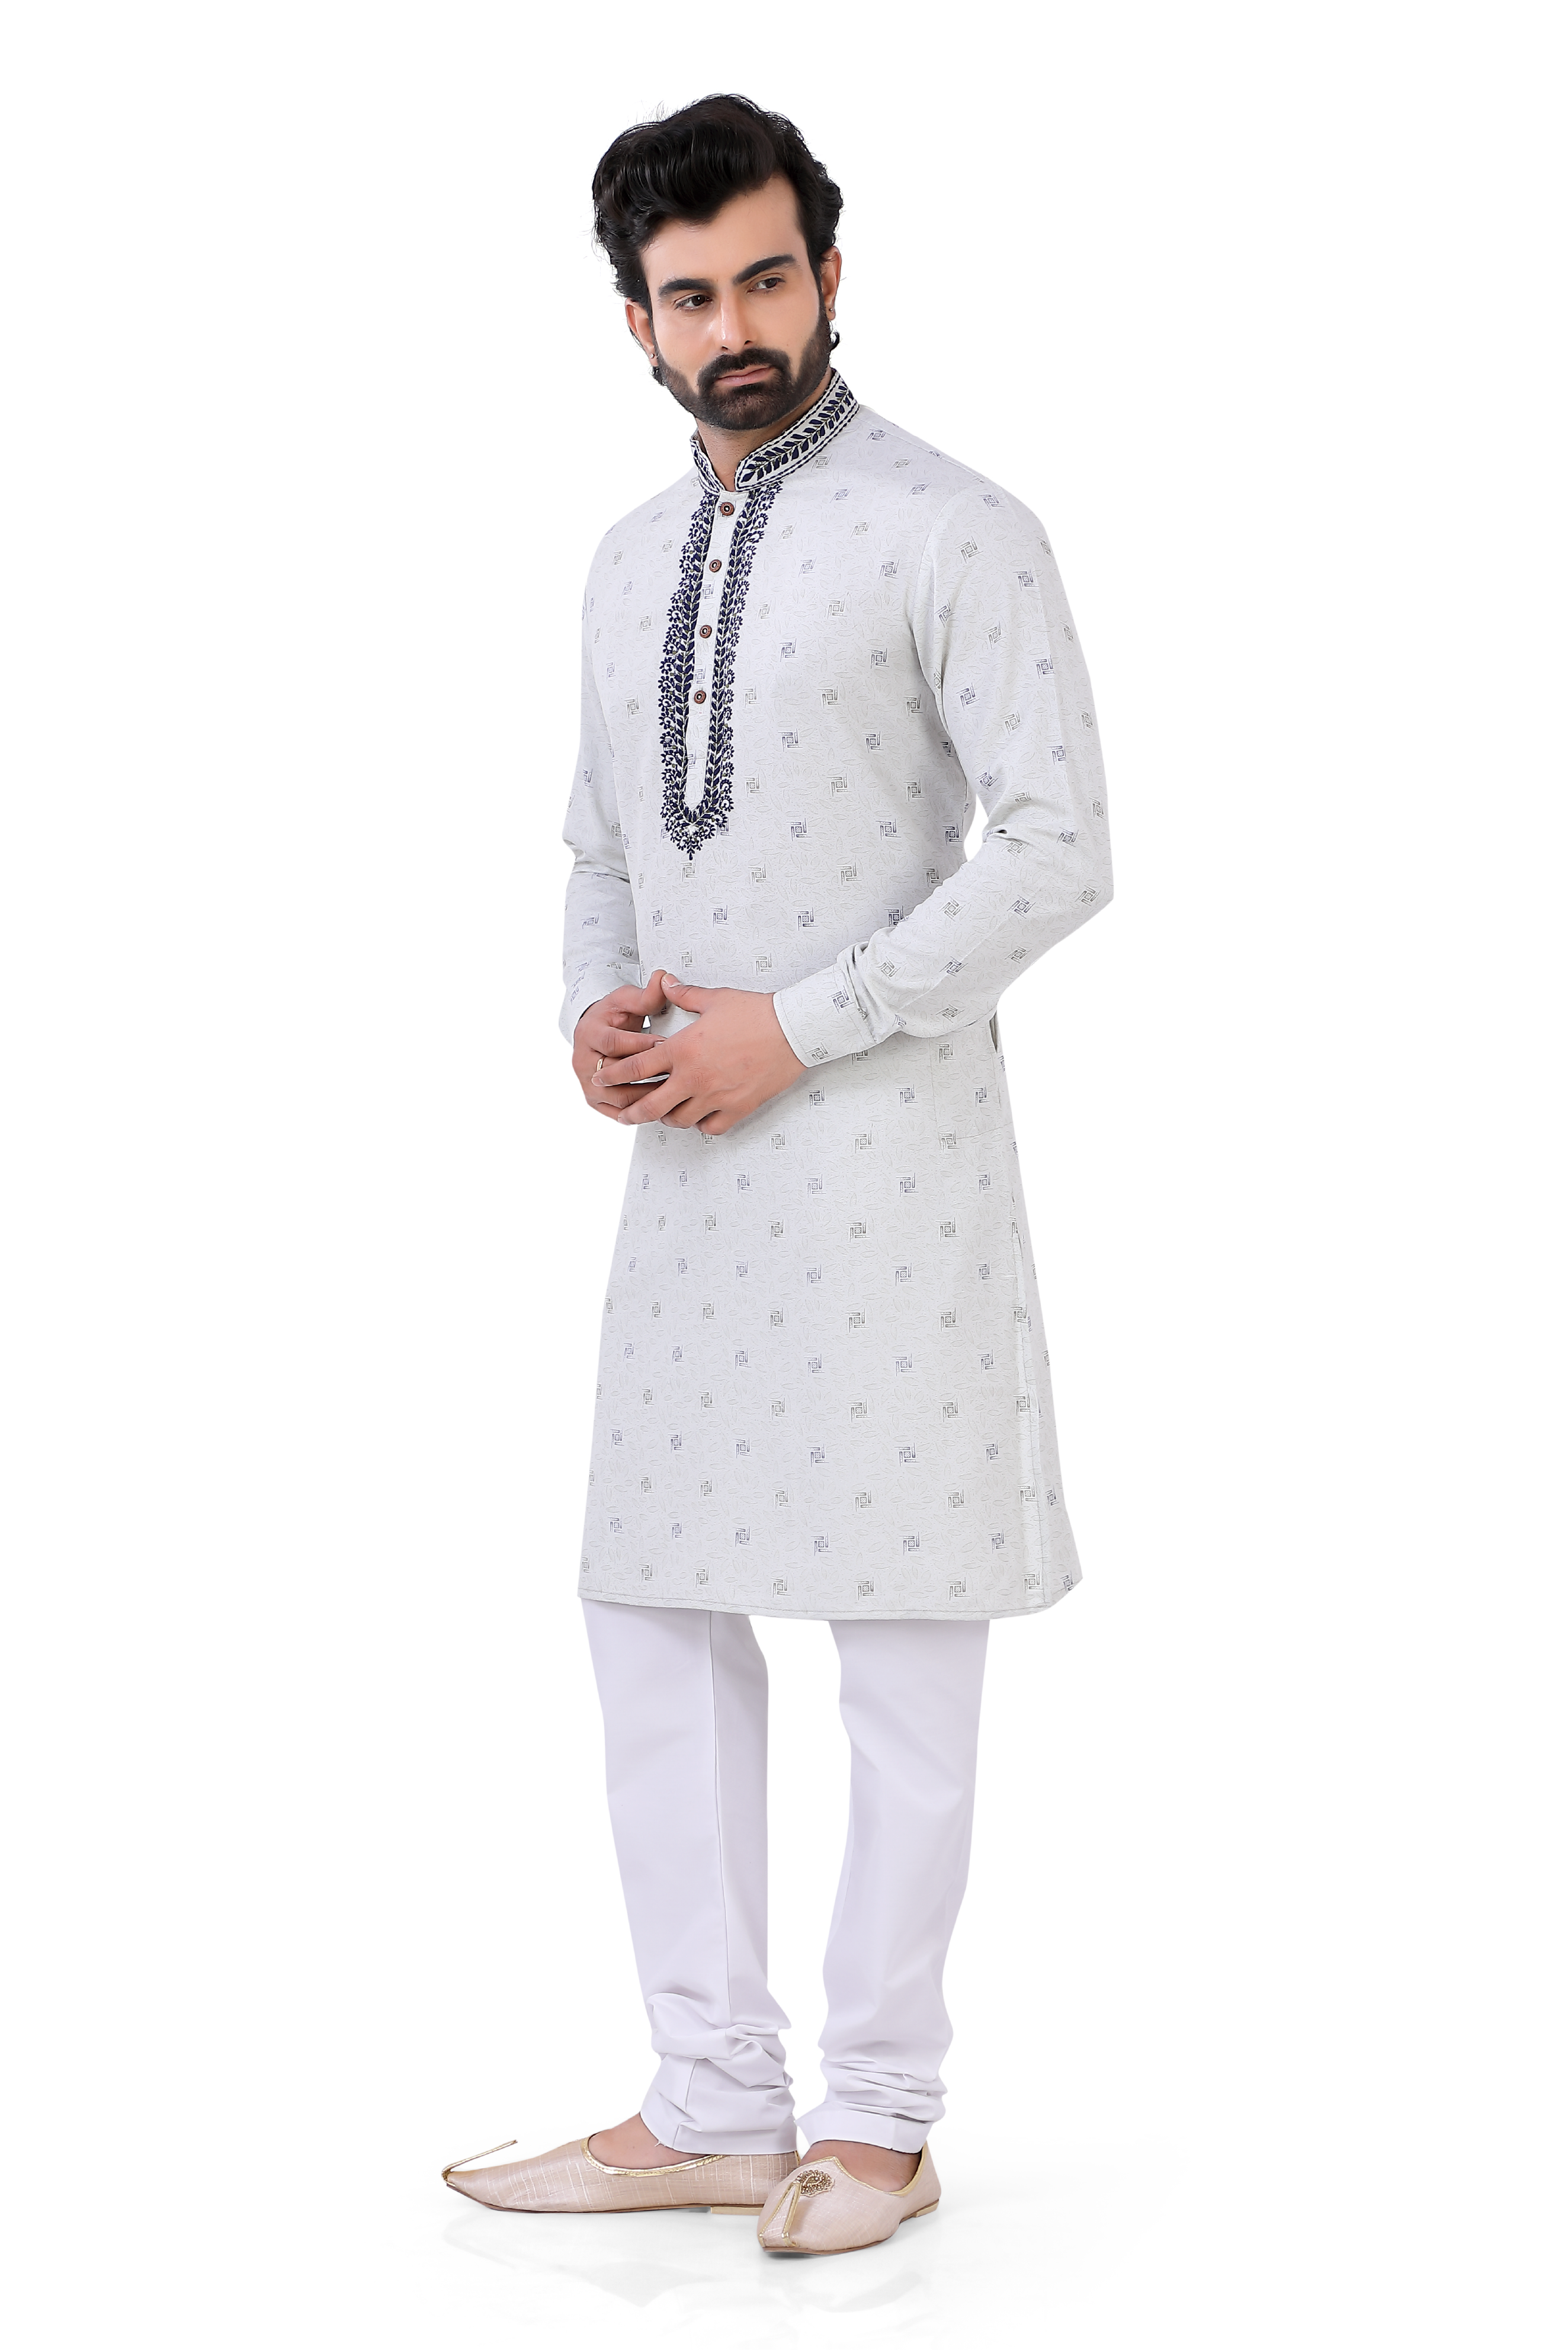 Cotton Printed Kurta and Pajama with embroidery in white